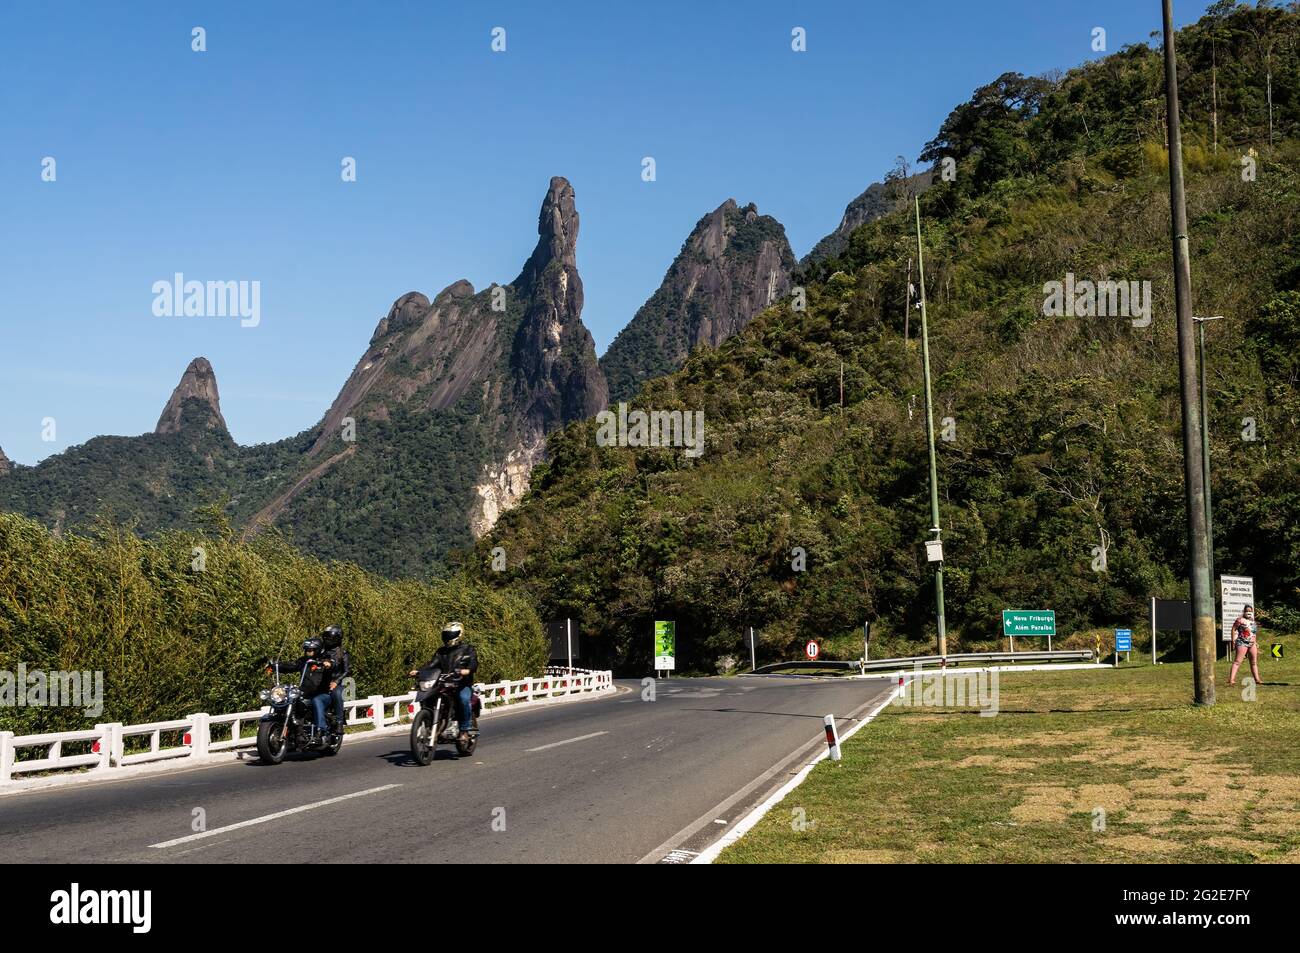 Traffic passing at the cloverleaf interchange of Rio-Teresopolis highway with Our Lady finger, God's Finger and Cabeca de Peixe peaks at the back. Stock Photo